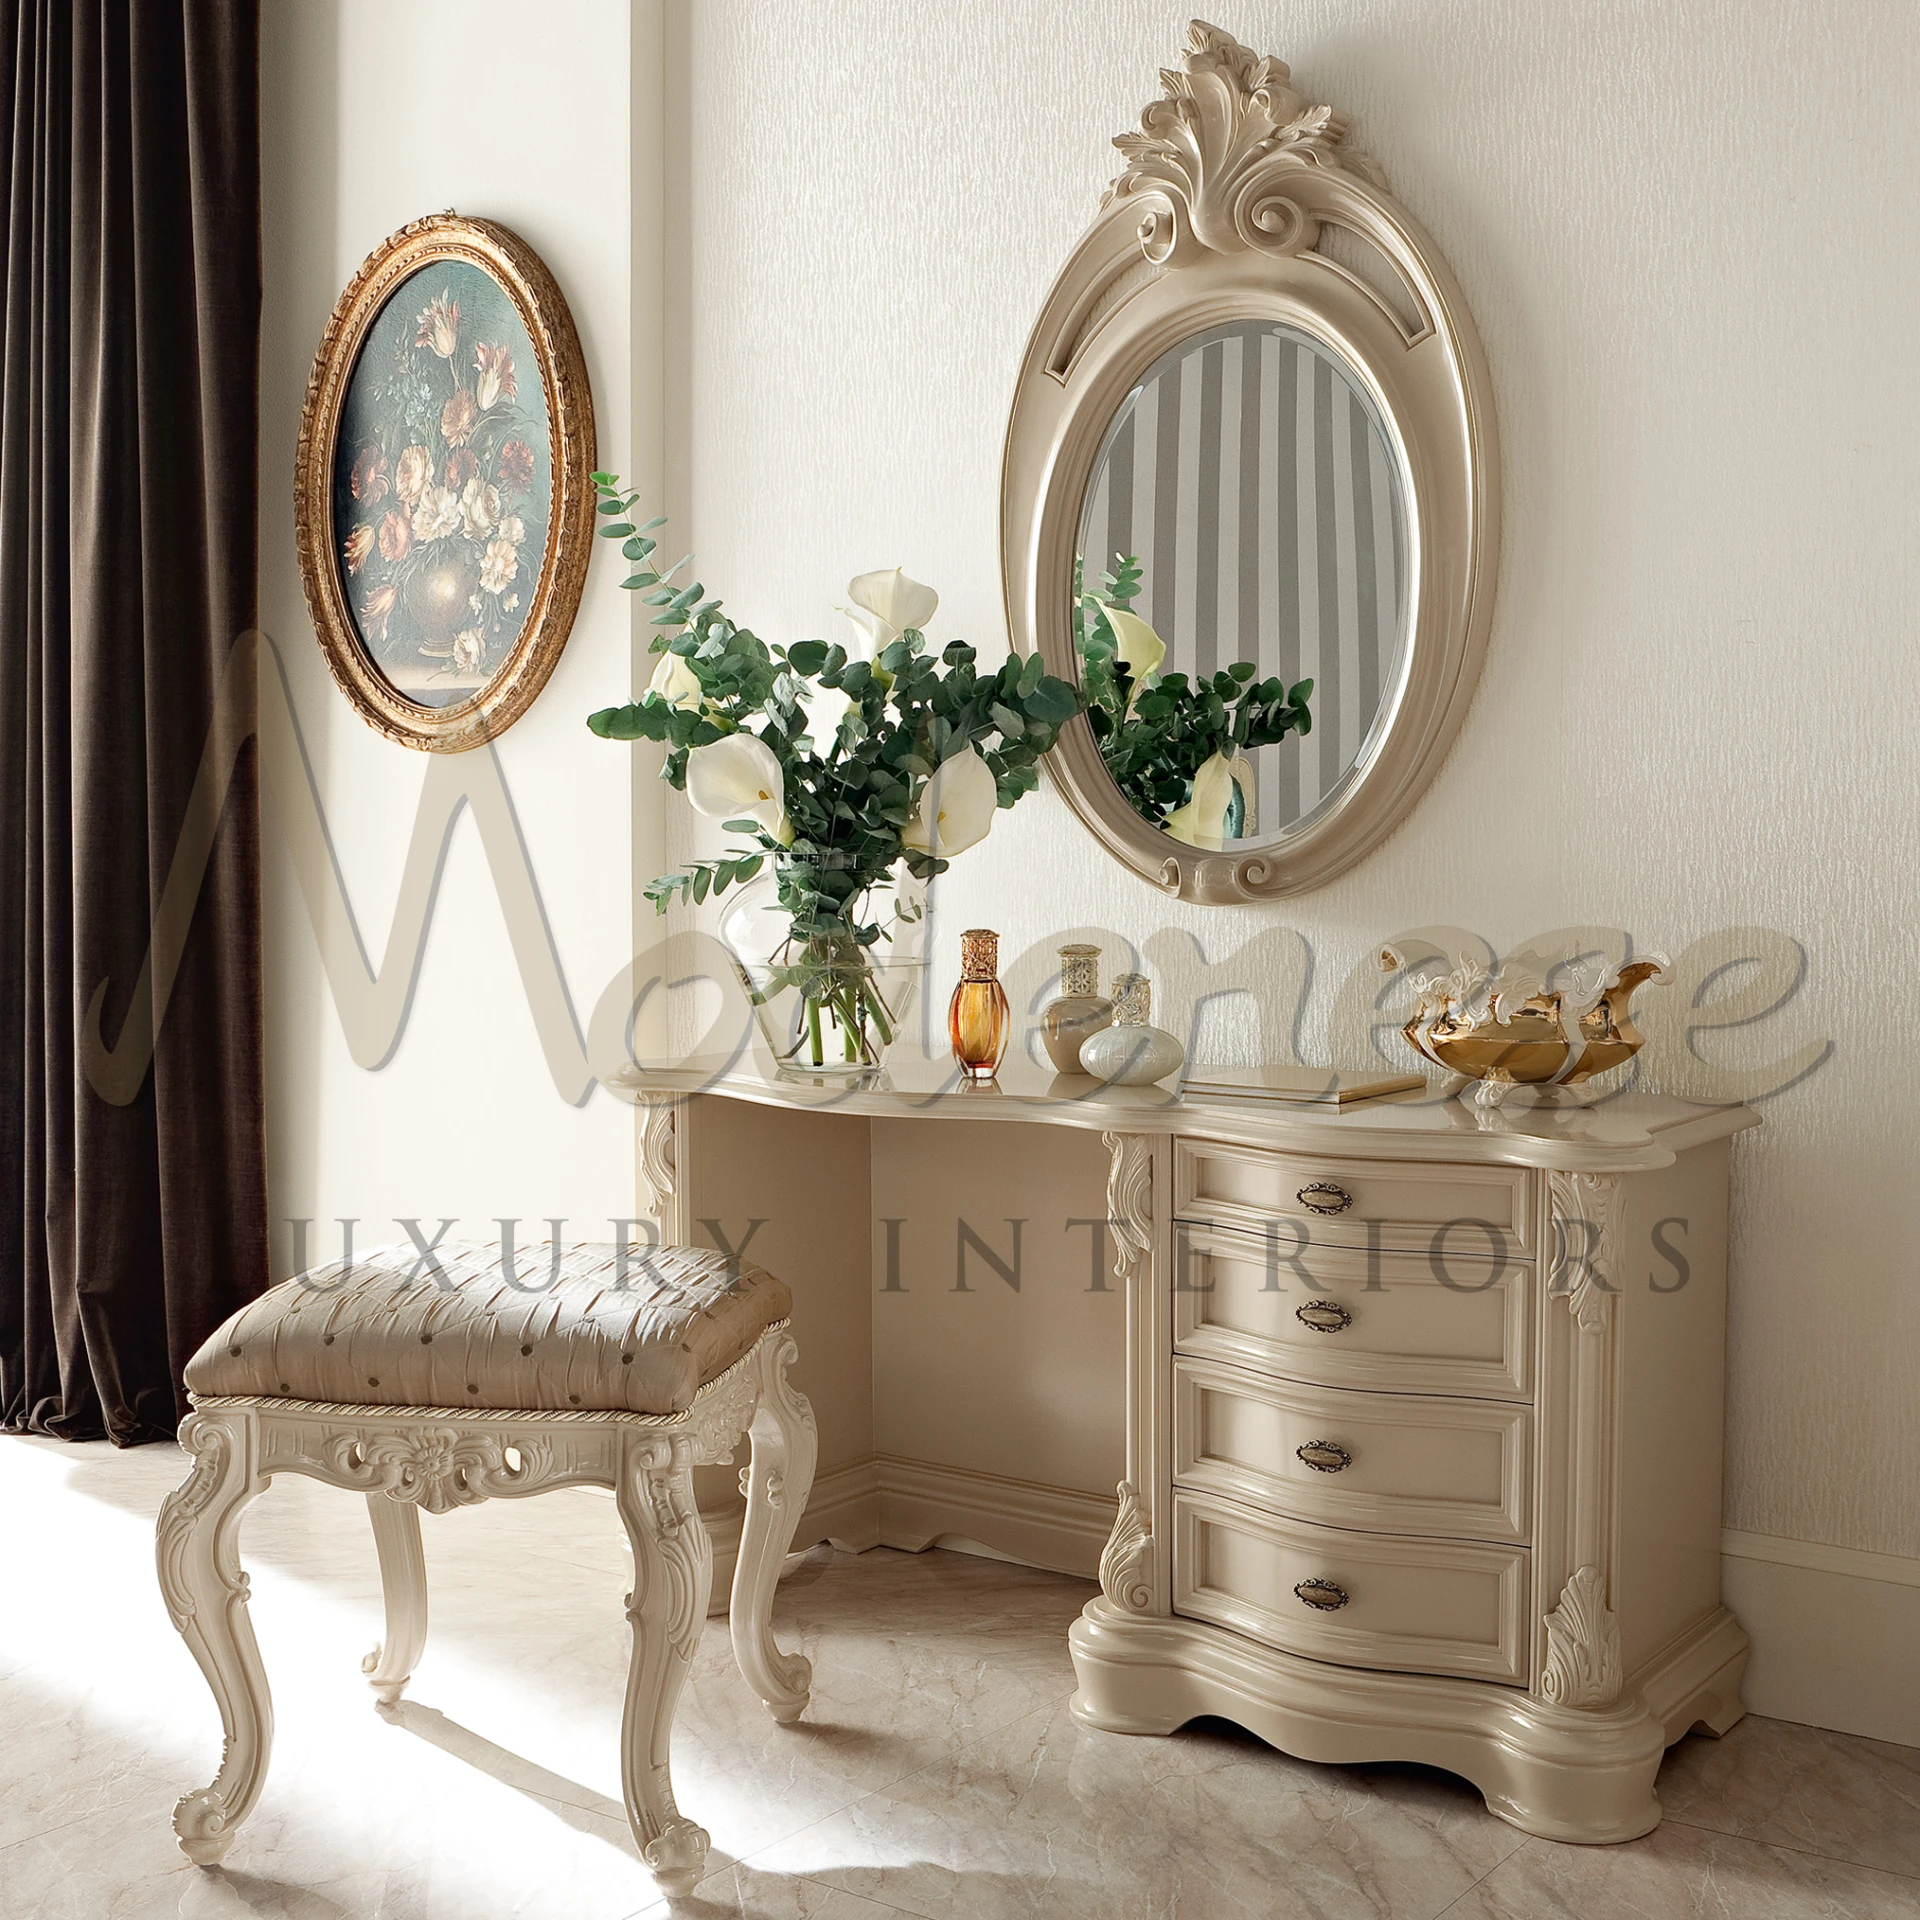 Soft-toned dressing table with elegant curves and detailed craftsmanship, paired with a textured upholstered stool and an array of delicate table-top accessories.